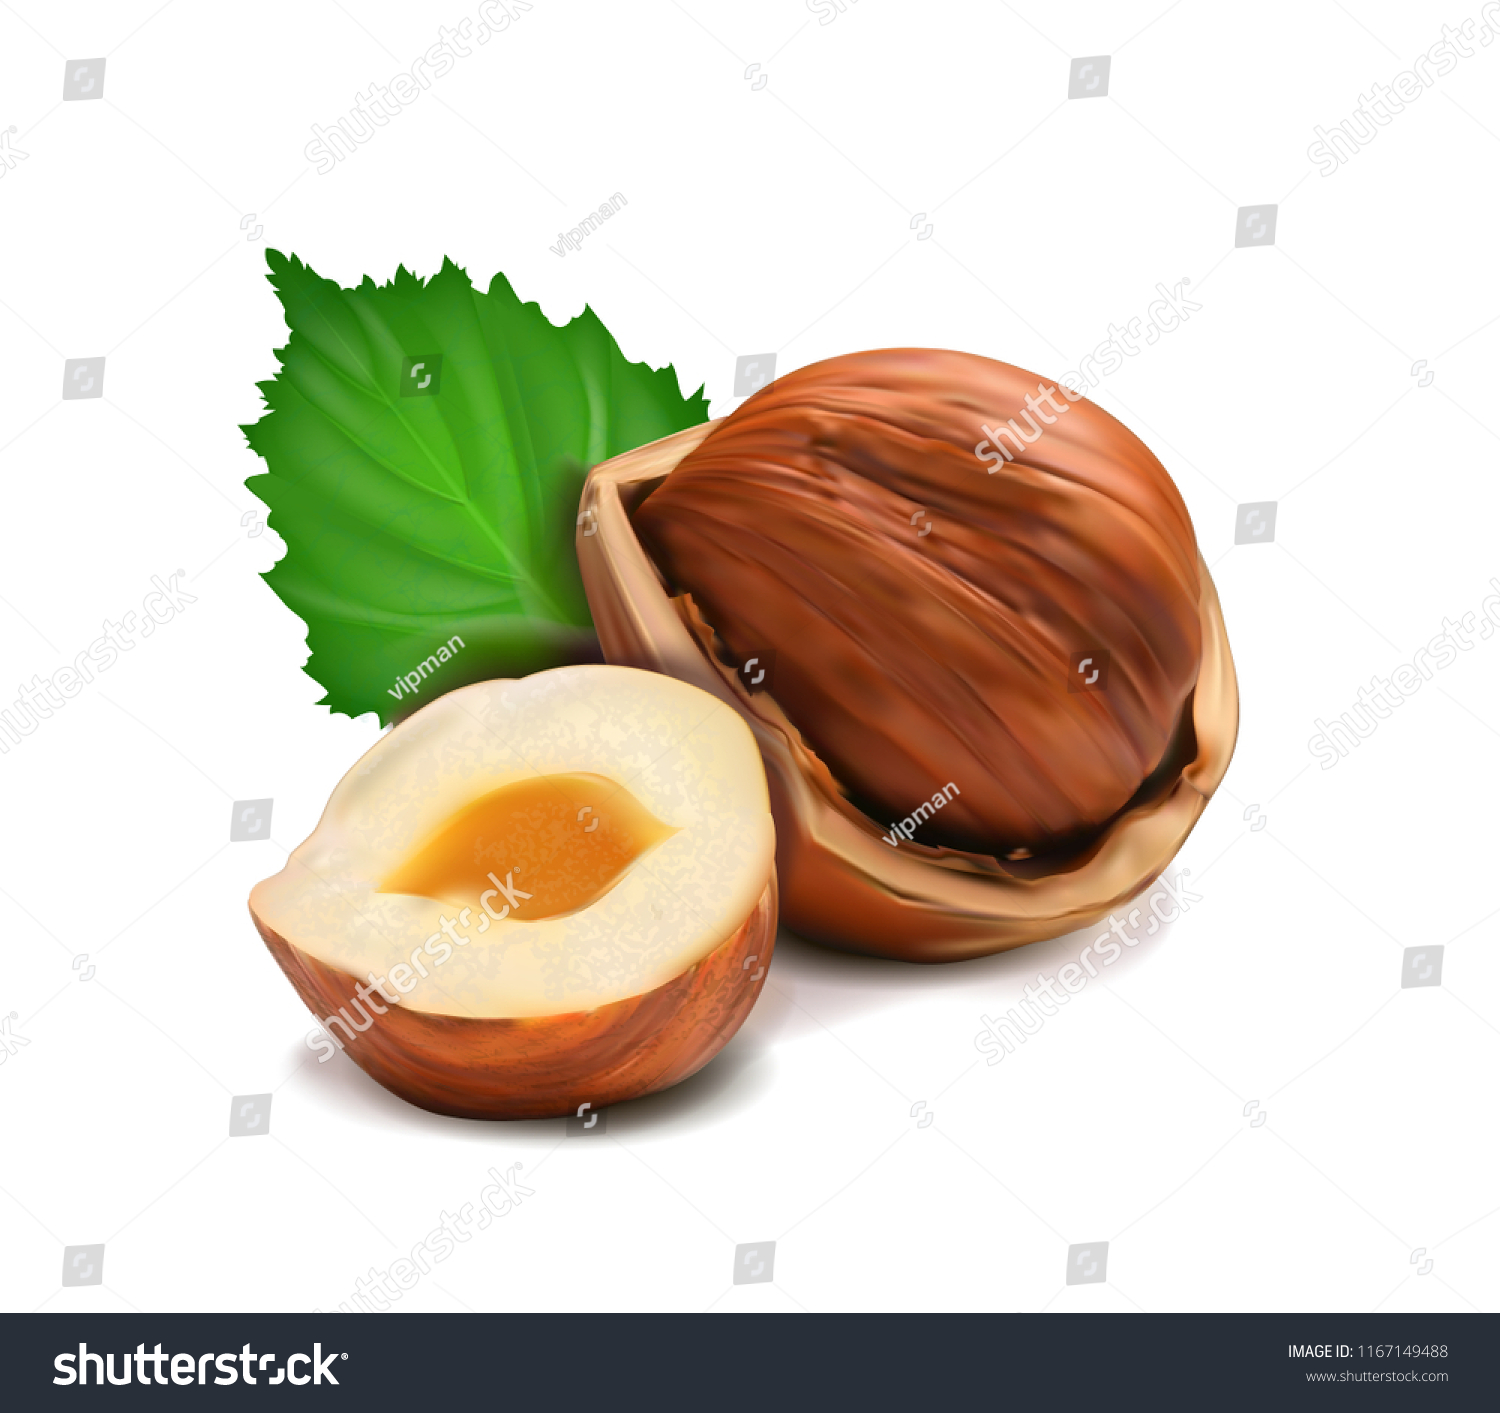 Download Vector Realistic Illustration Hazelnut Peeled Whole Stock Vector Royalty Free 1167149488 Yellowimages Mockups